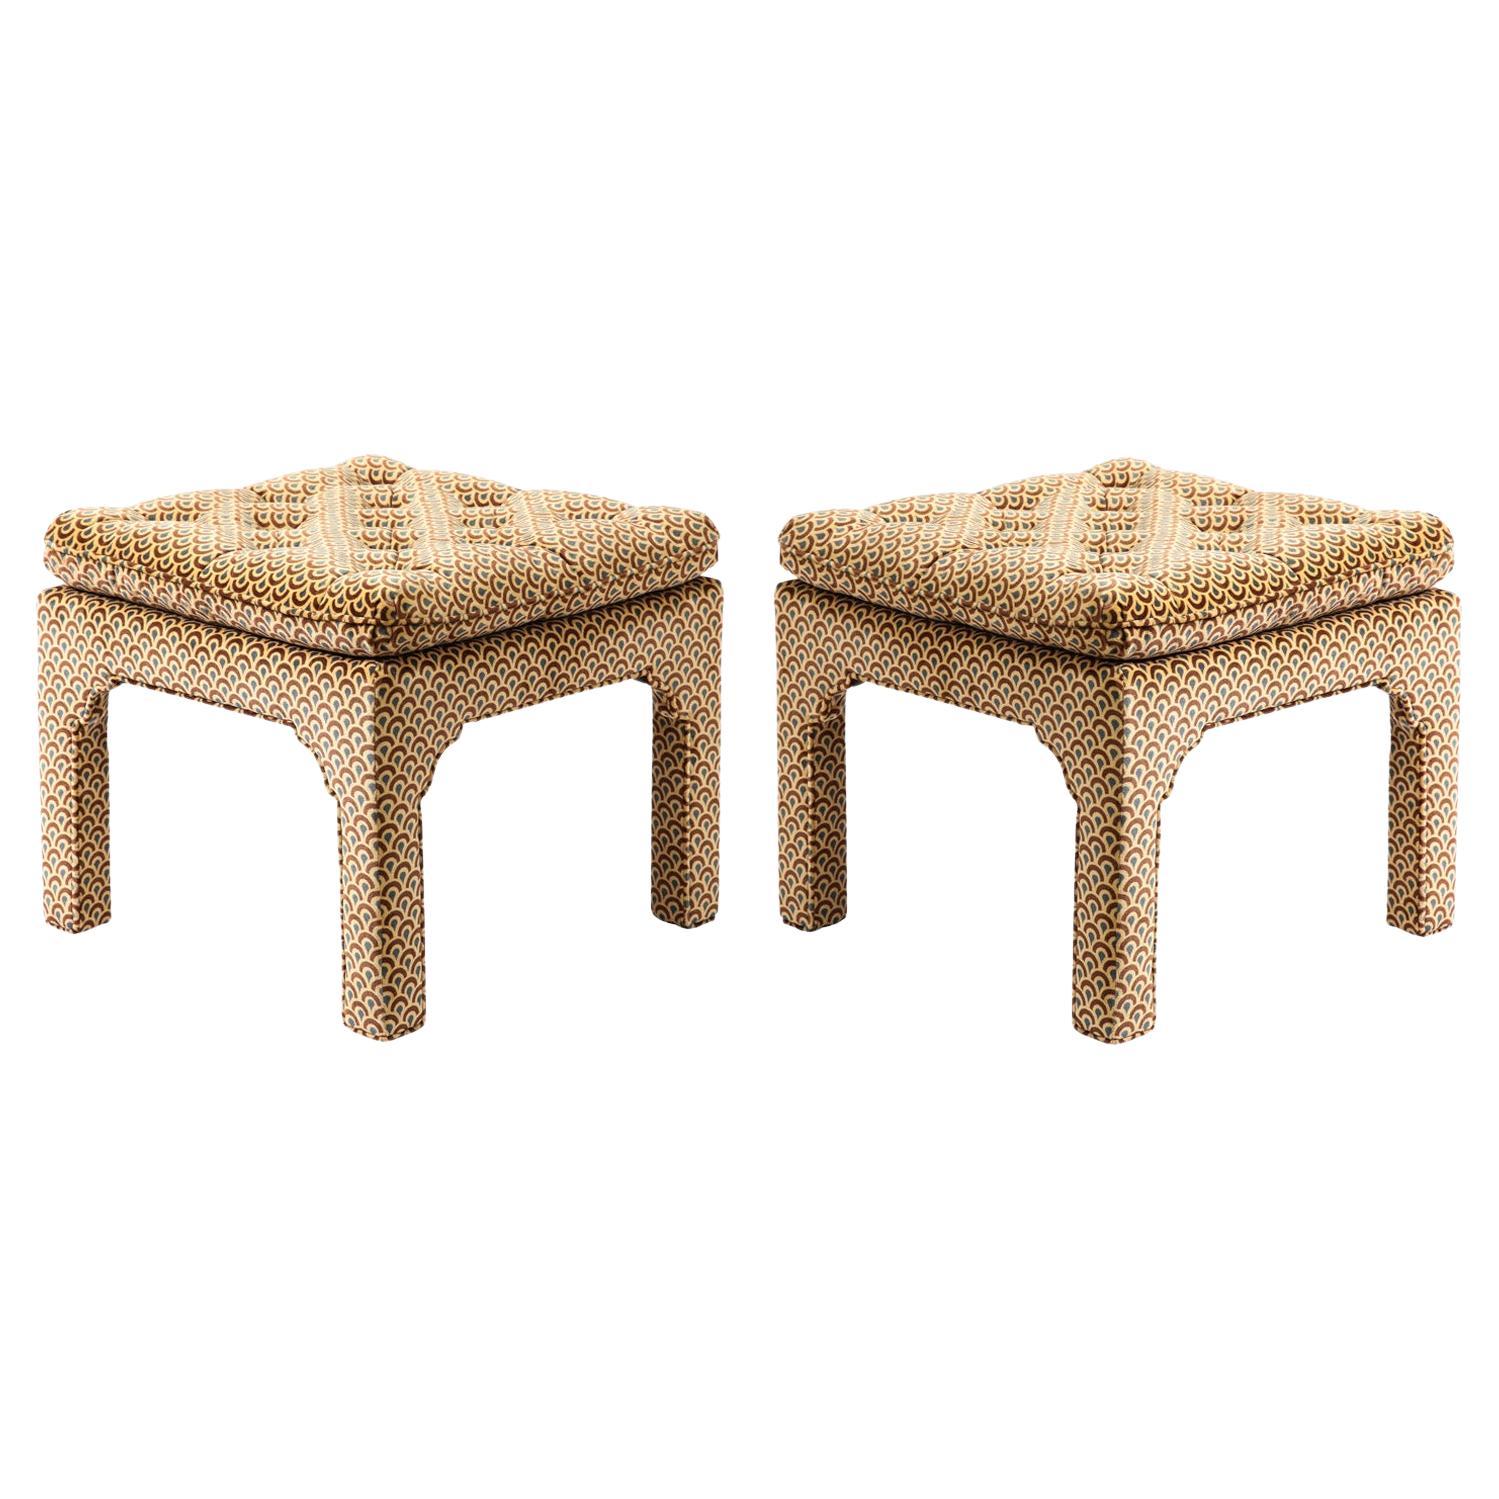 David Hicks Style Pair of Chic Upholstered Benches/Ottomans 1970s